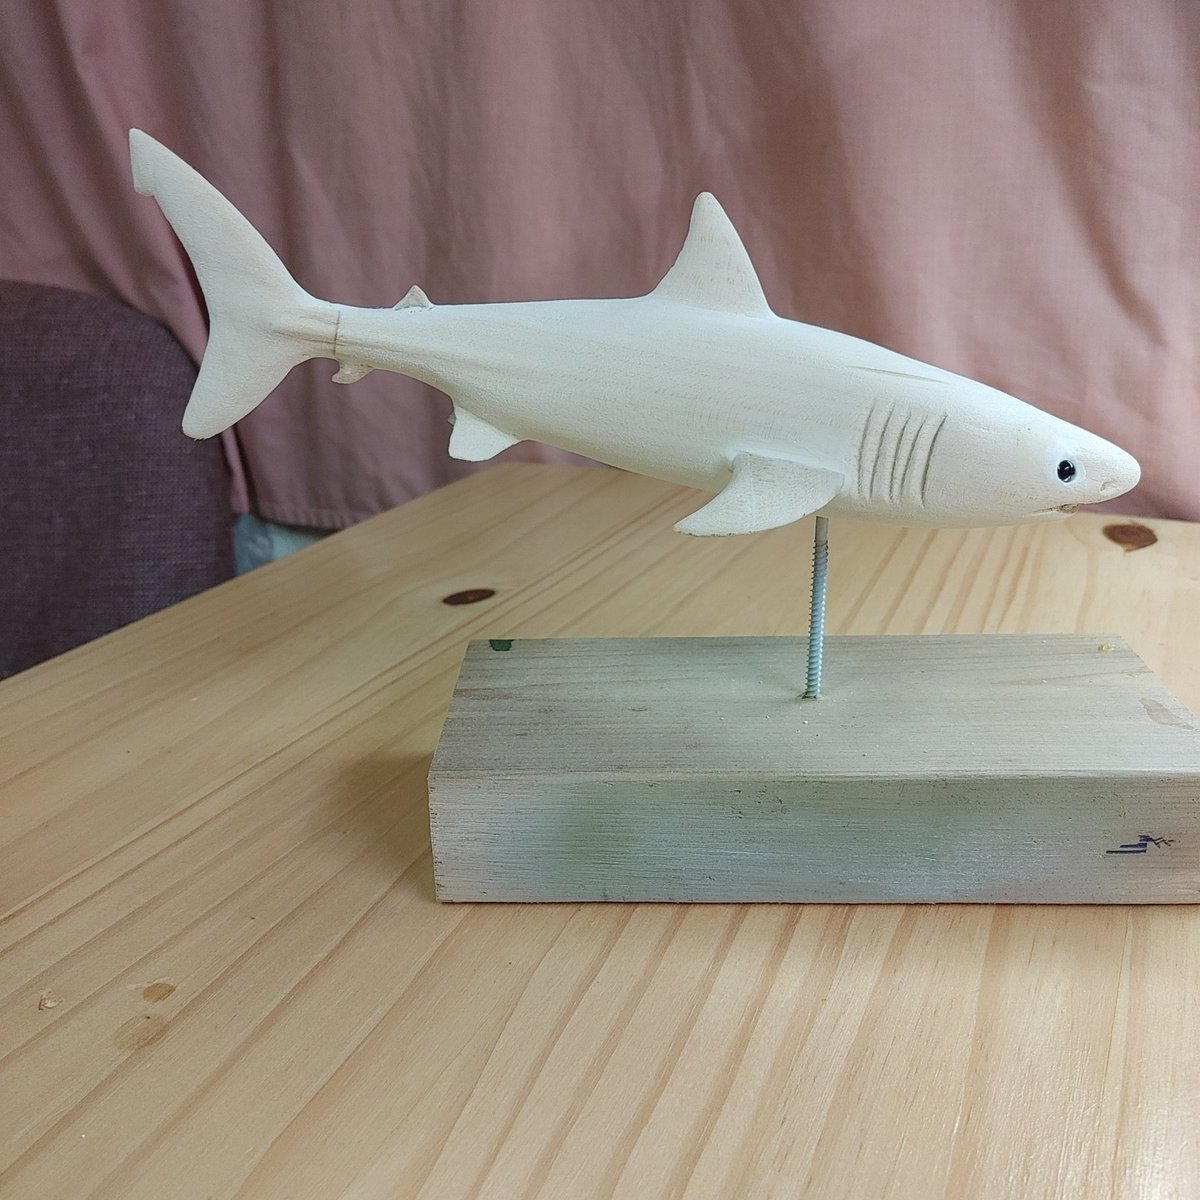 Been working on a Great White, nearing painting stage, thanks for looking